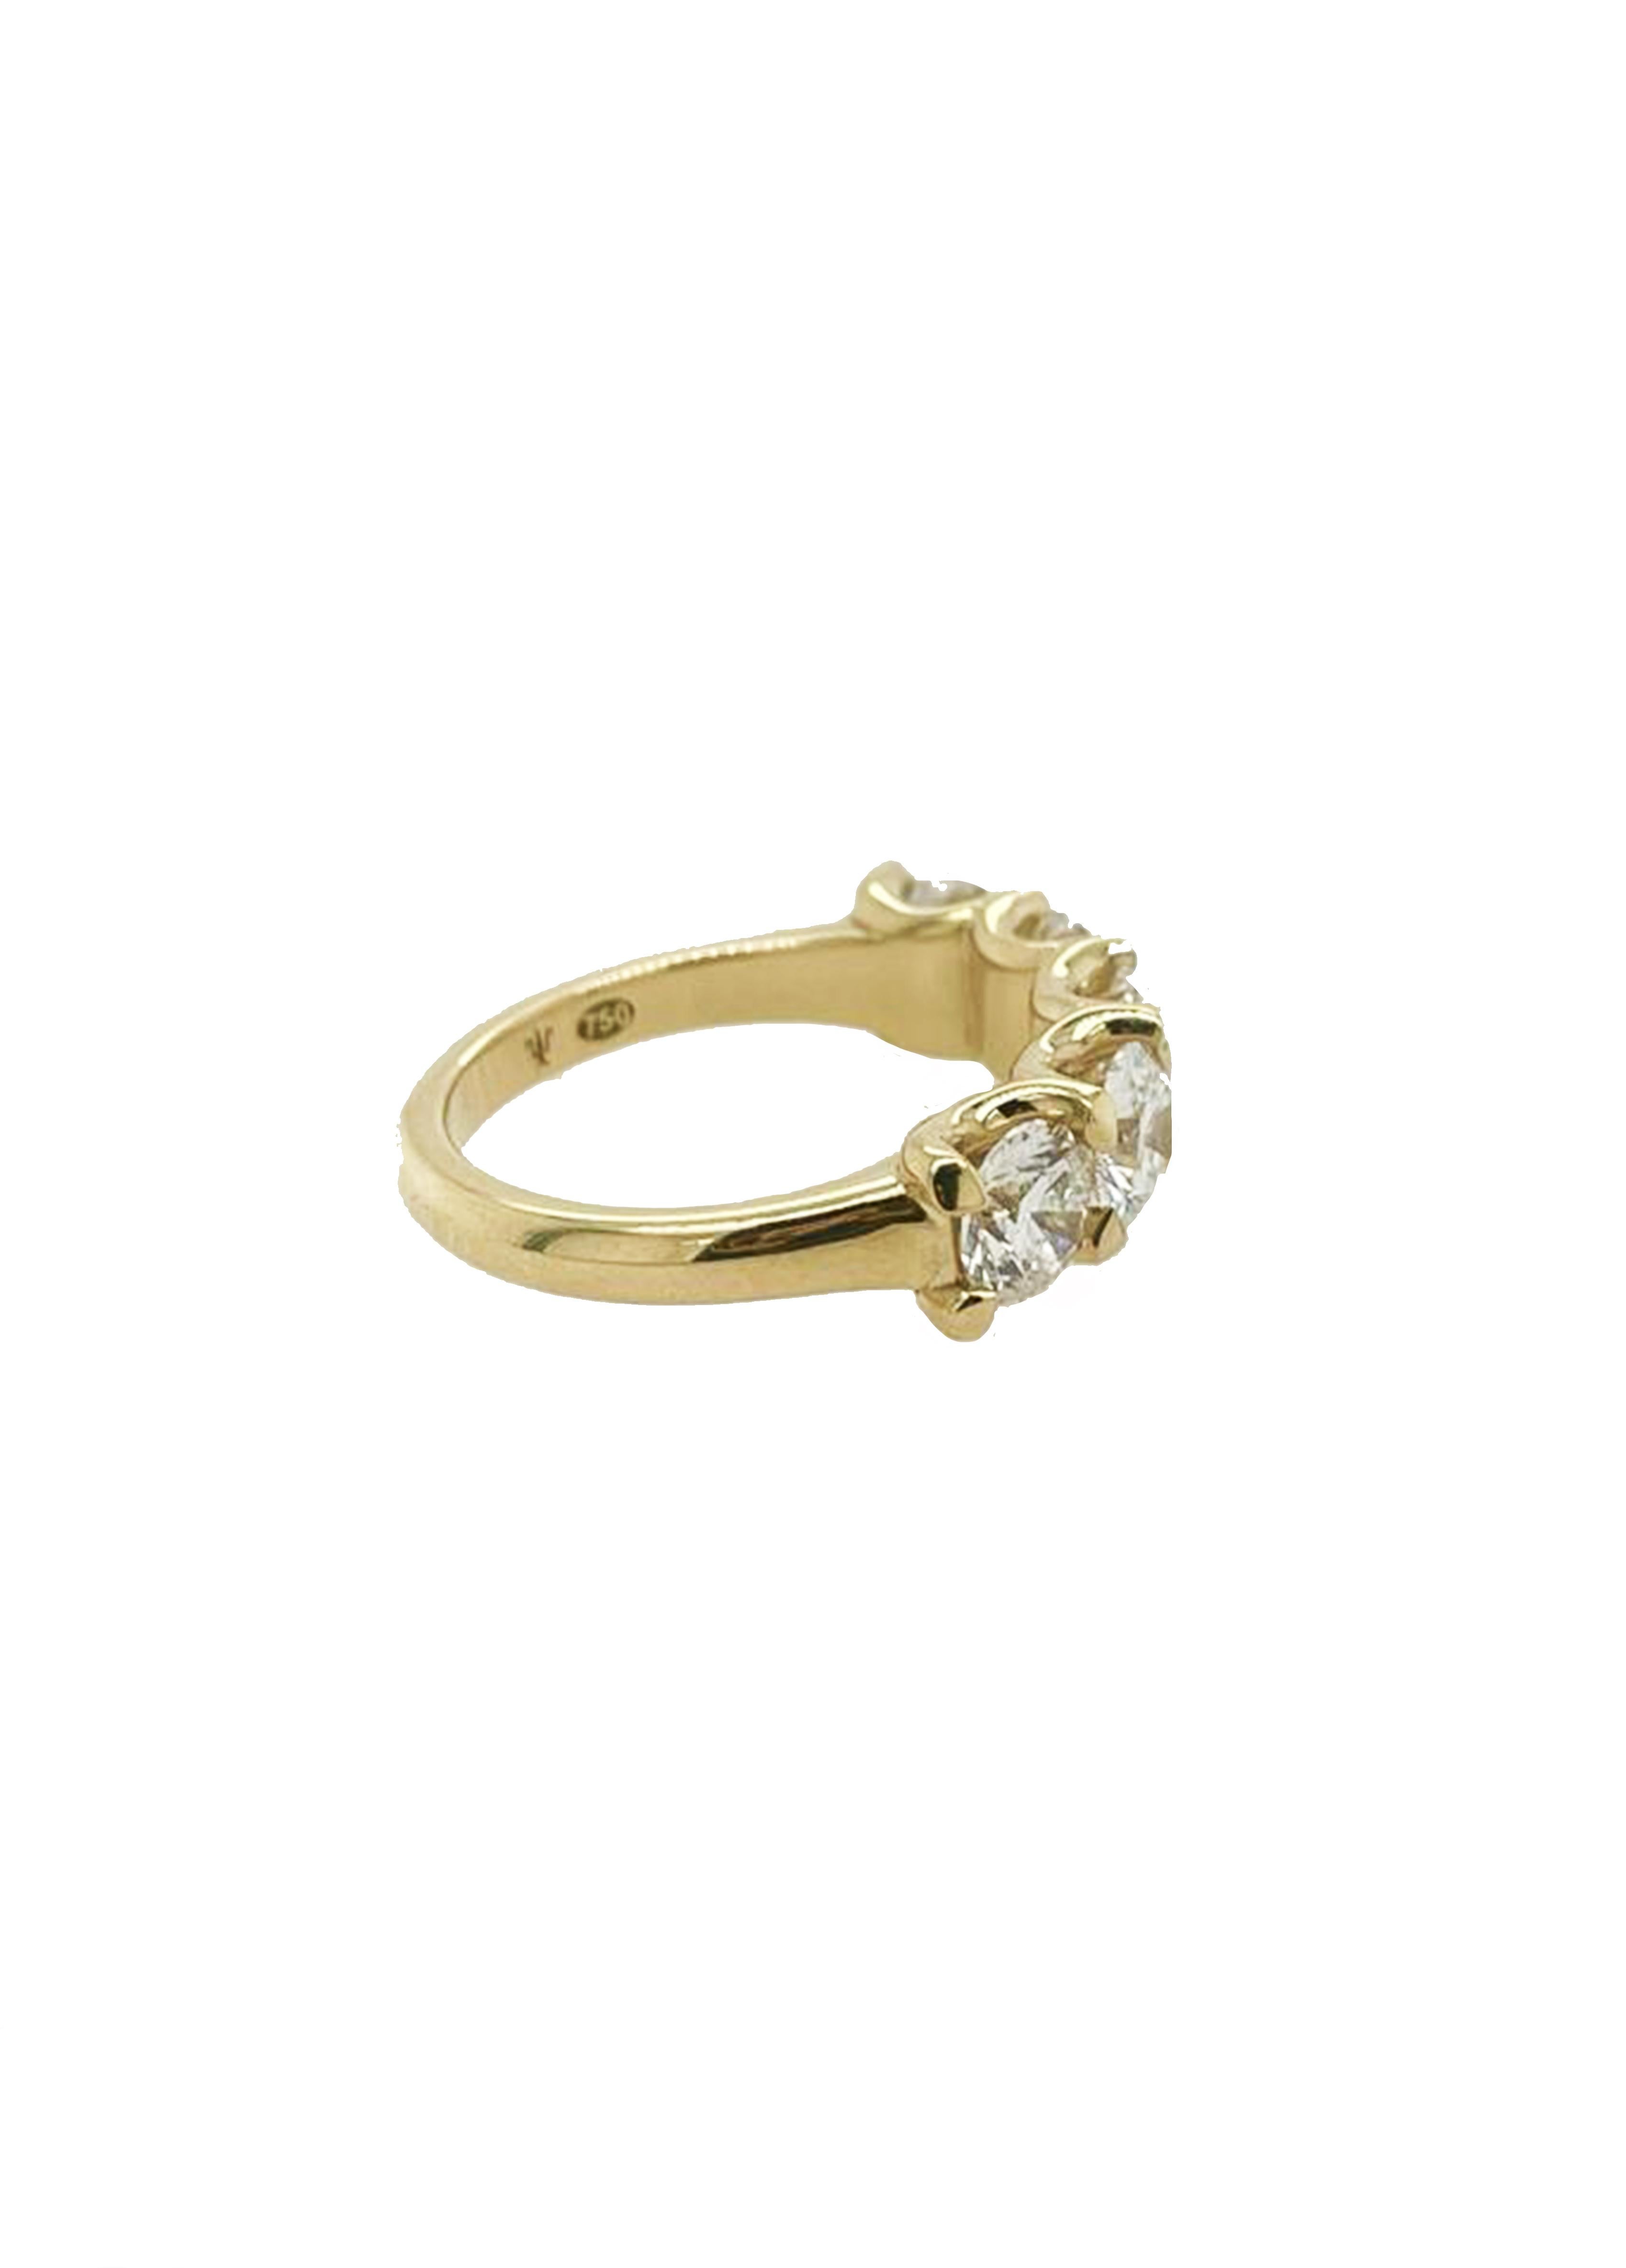 2.50ct White Diamond ring set in 18ct yellow gold Eternity band For Sale 3